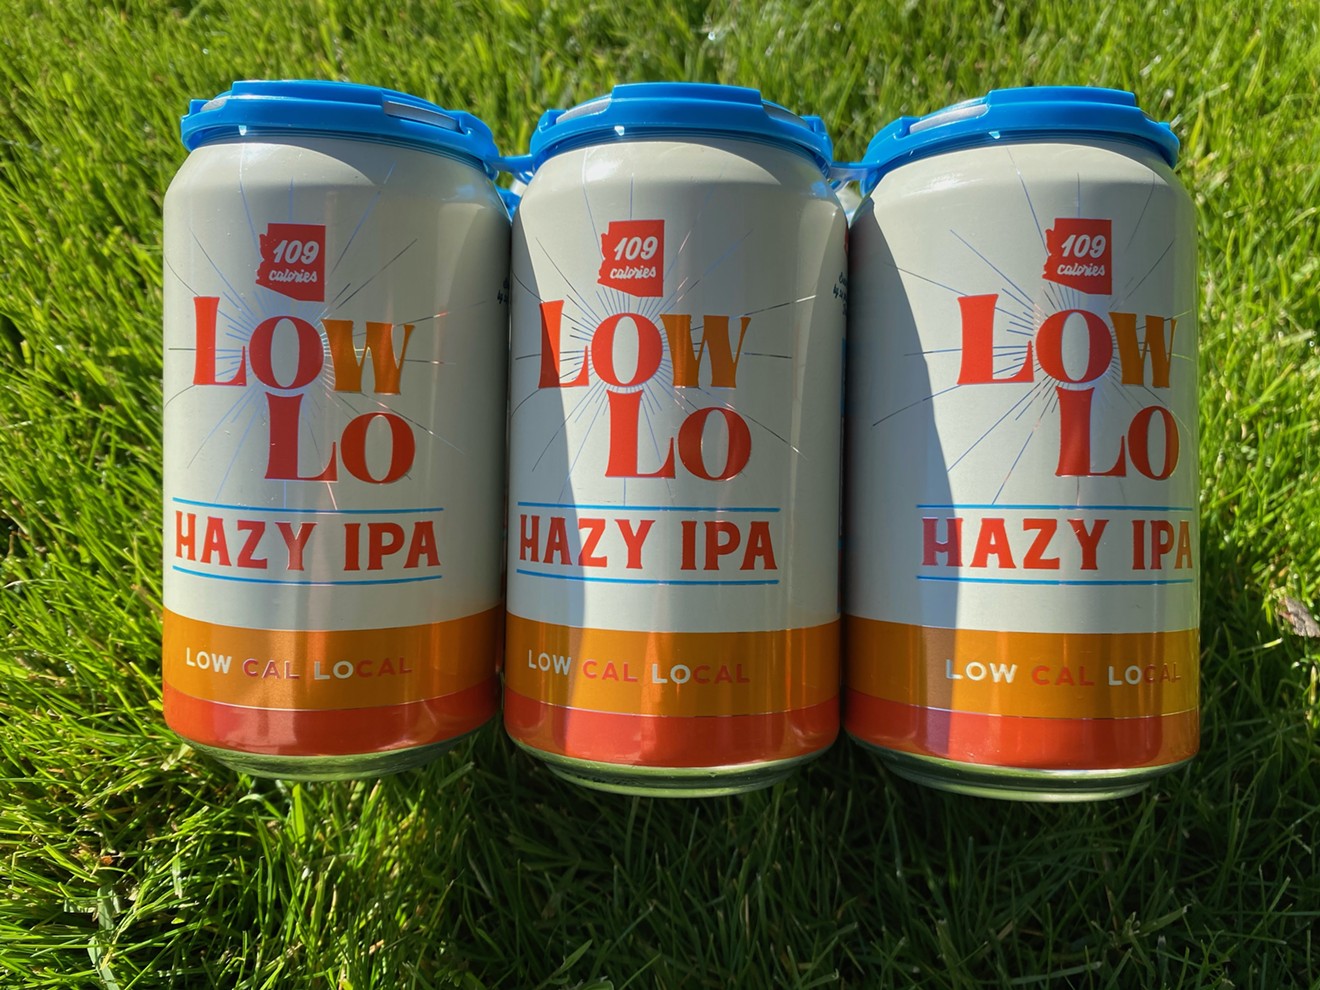 Meet the low-calorie and local Low-Lo Hazy IPA.